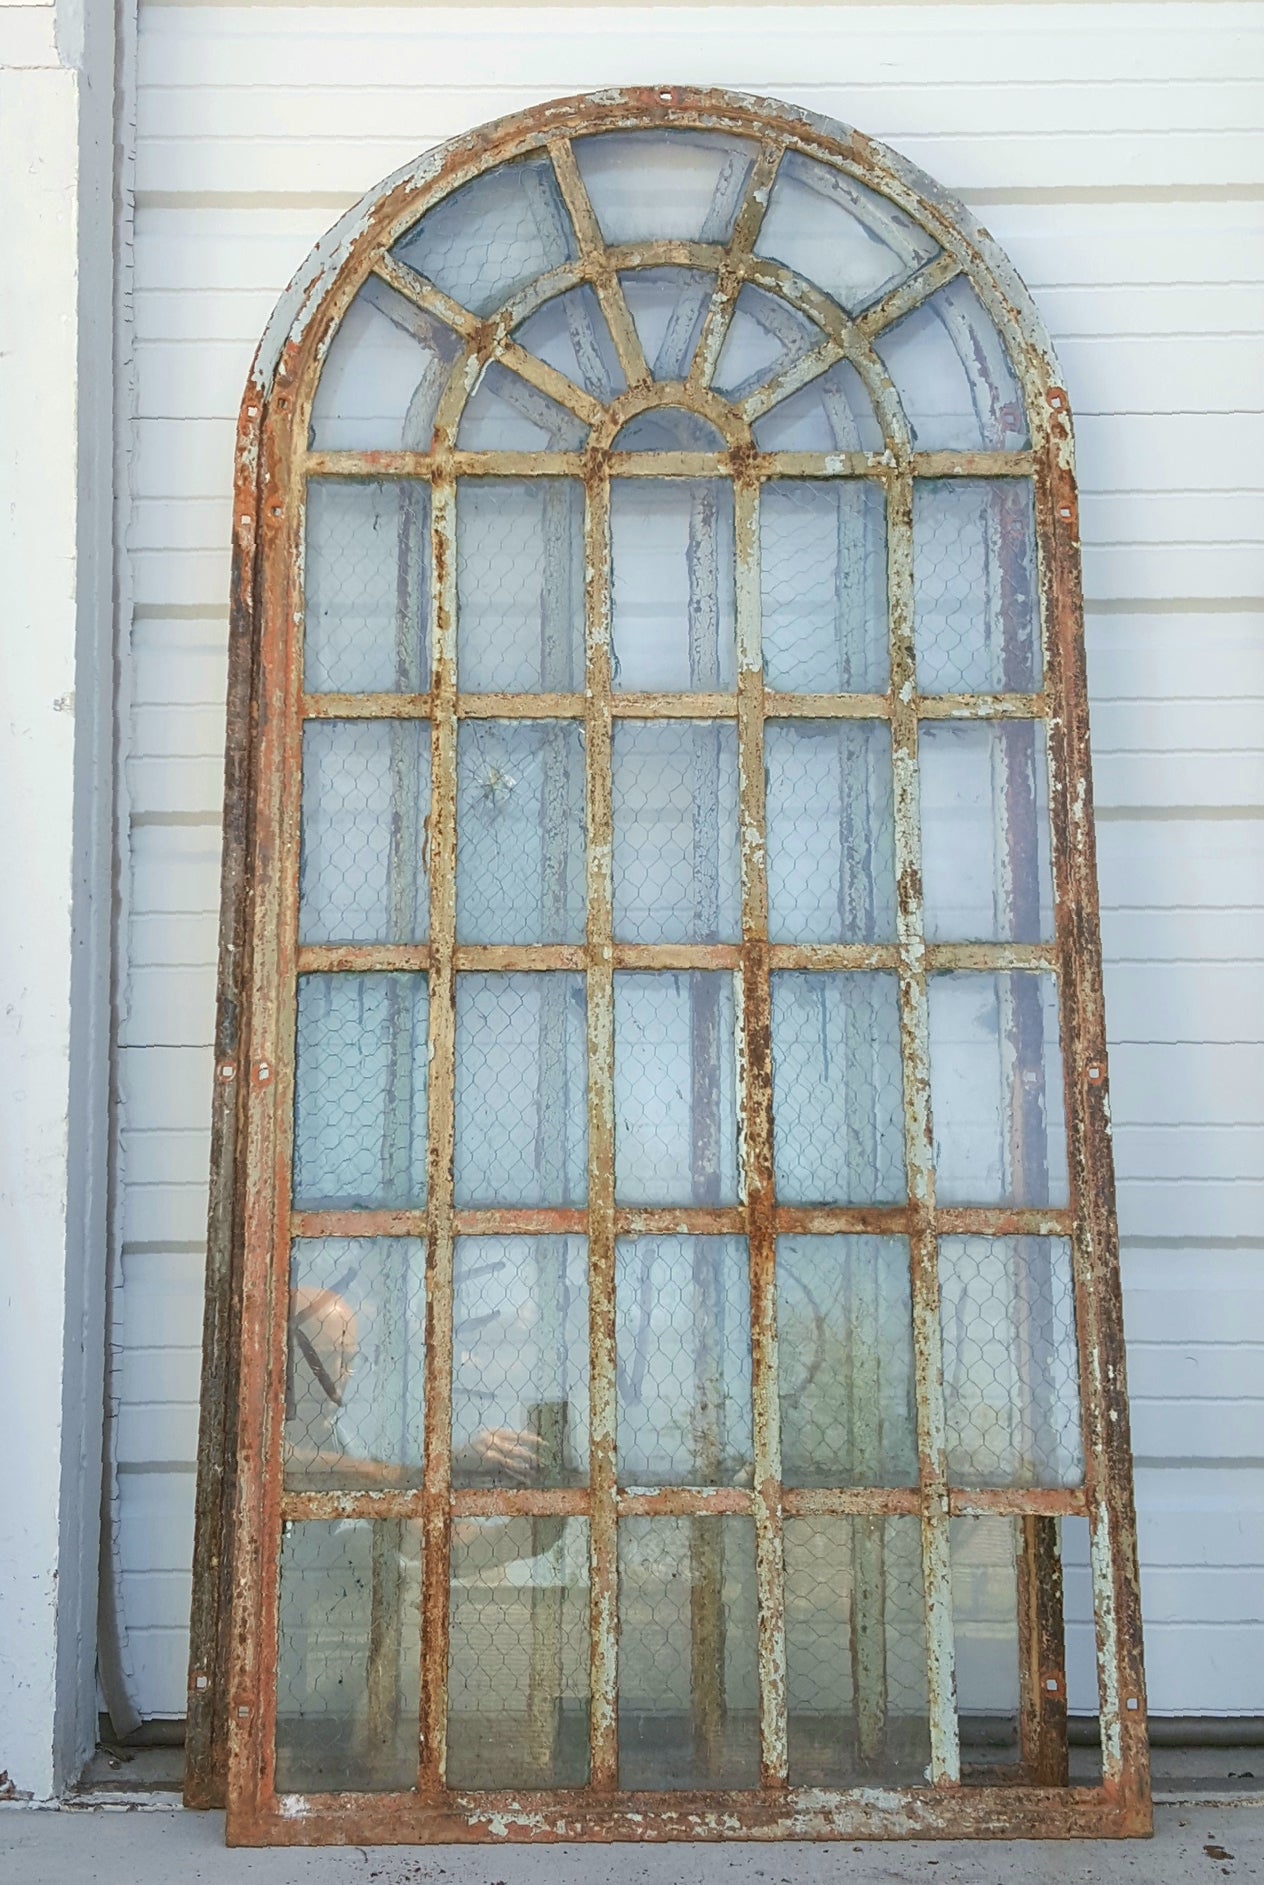 35 Pane Metal Extended Arched Style Window